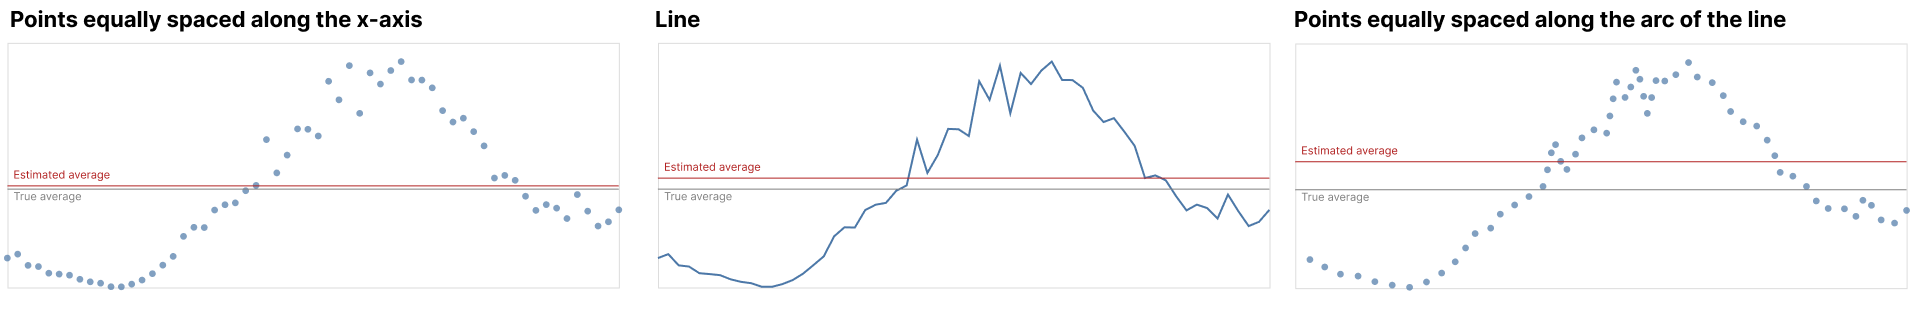 Image of three time series charts. The first encodes data with points equally spaced along the x-axis, the second uses a line, and the third uses points equally spaced along the arc of the line. On each chart, there is a grey overlaid line indicating the true average of the data and a red line showing participants' estimated average. 